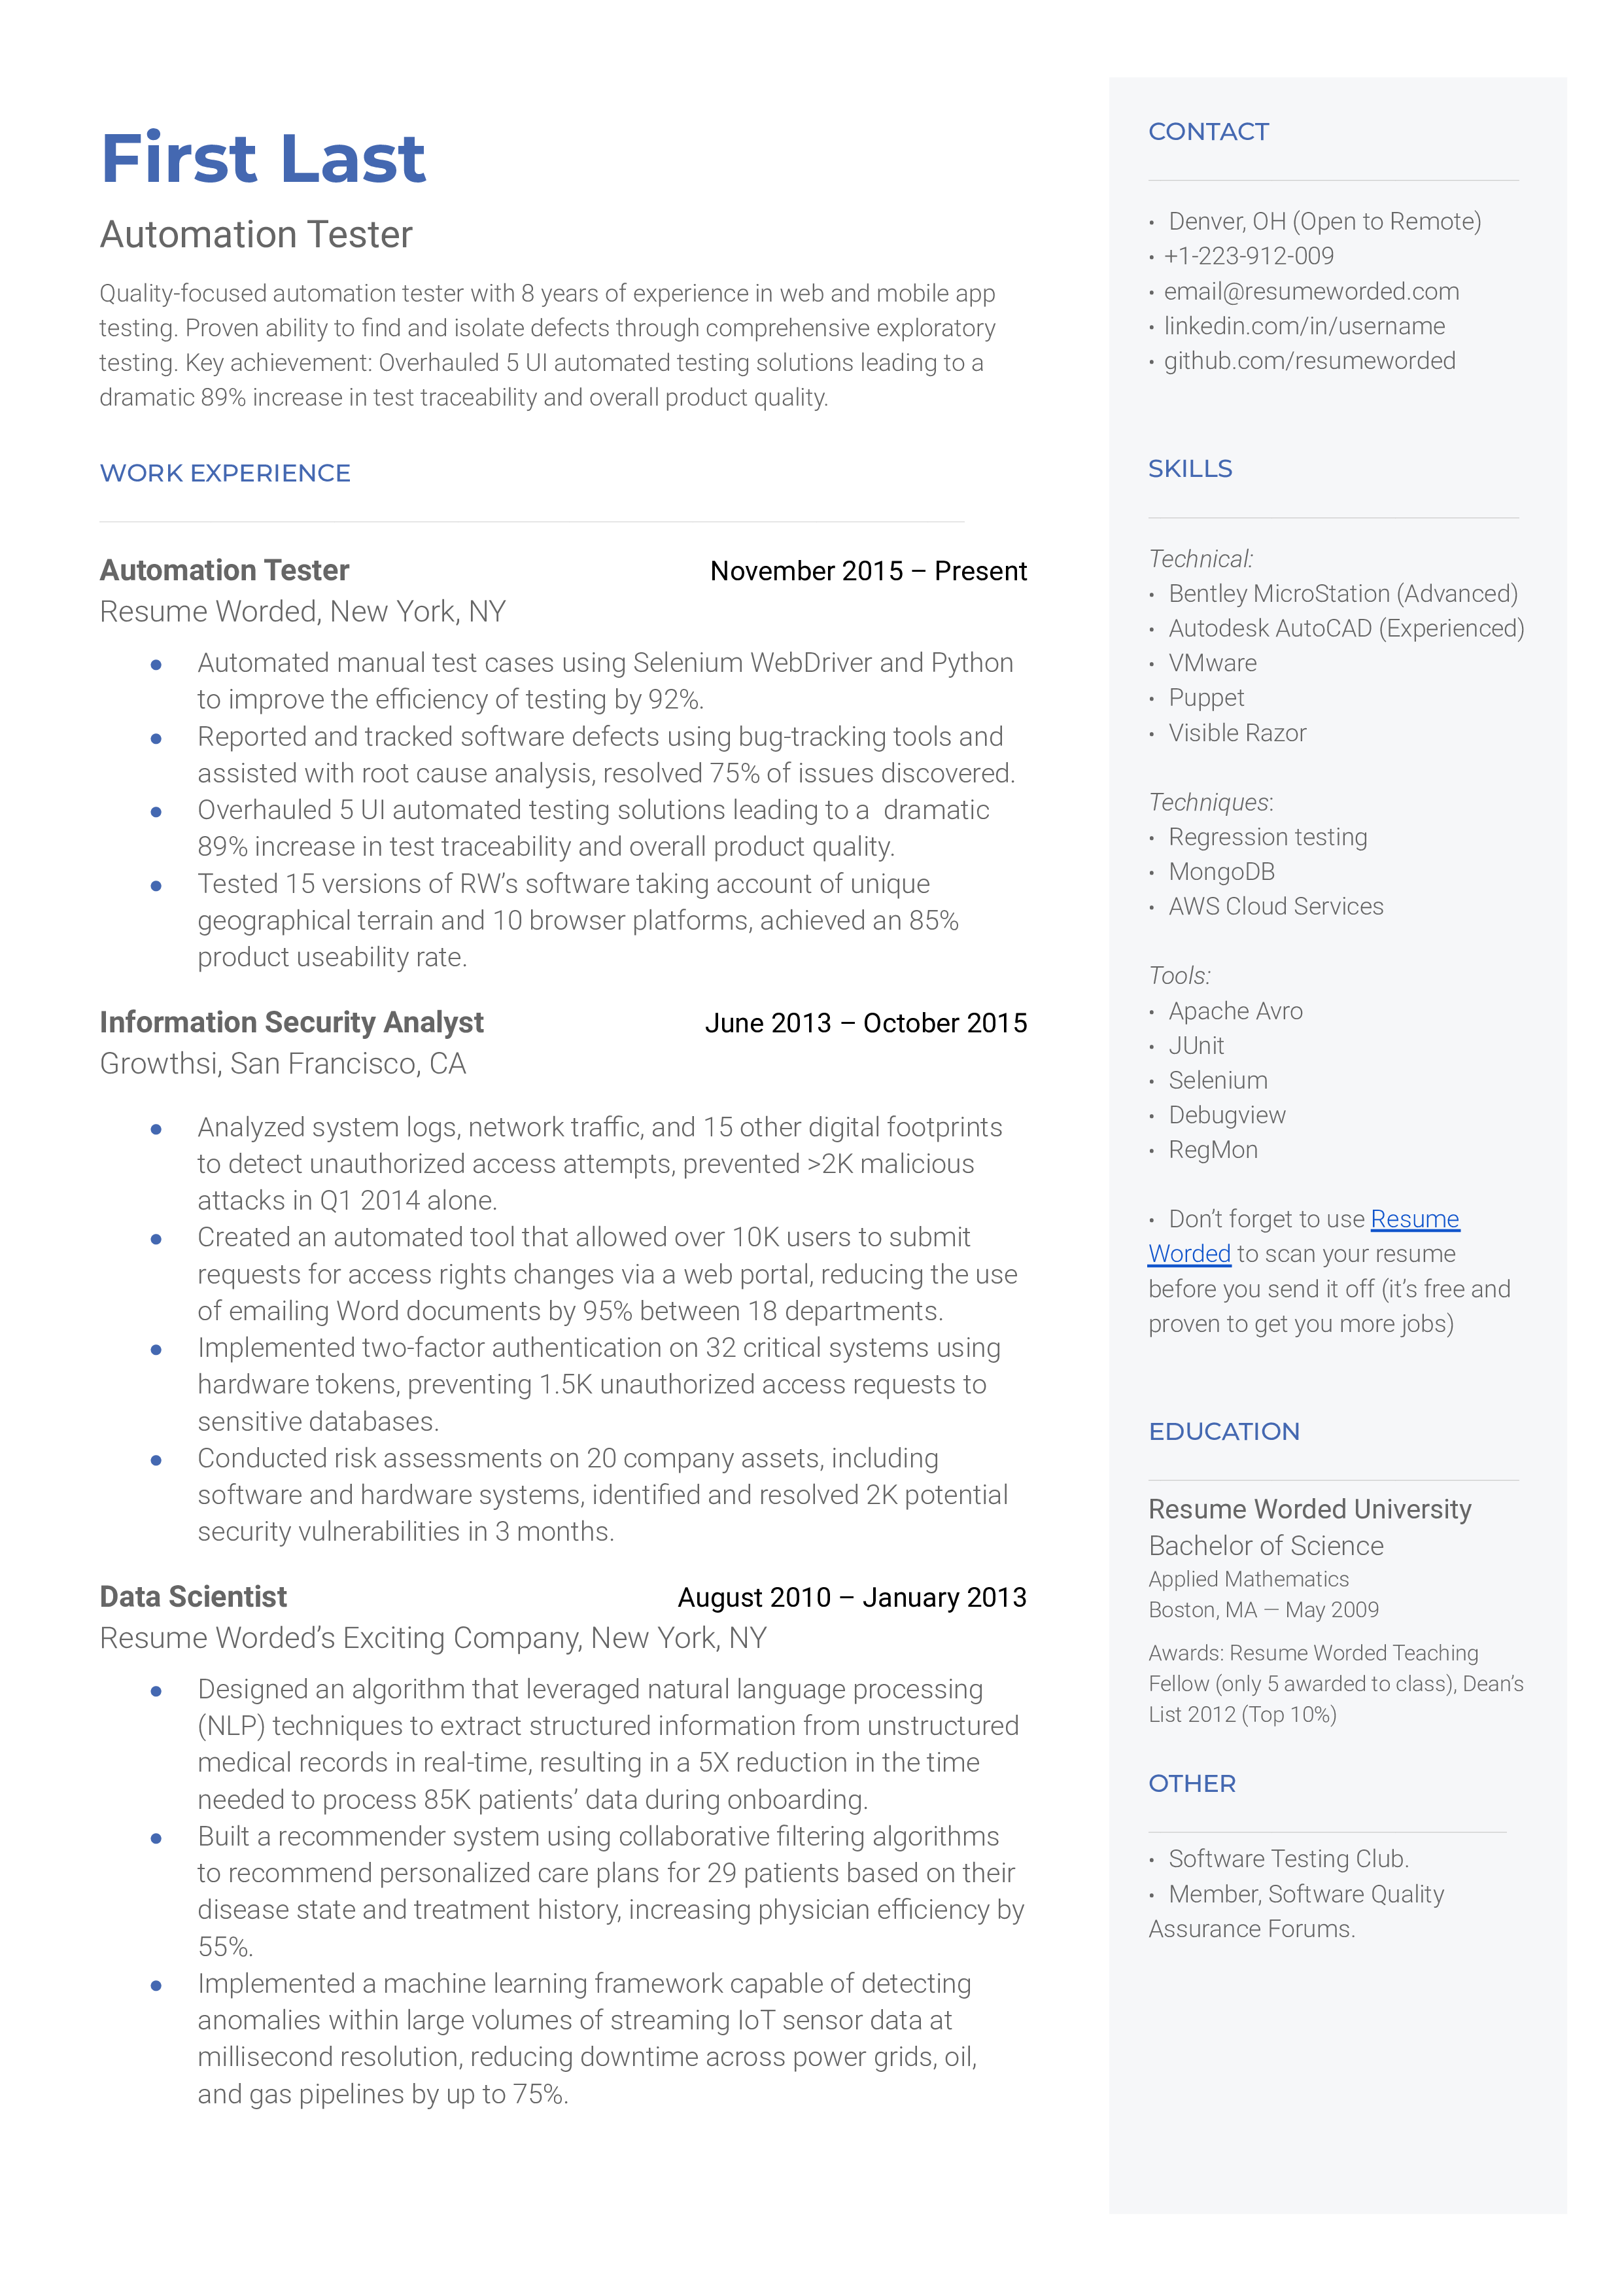 Automation tester resume sample that highlights applicant's testing capabilities and certifications.